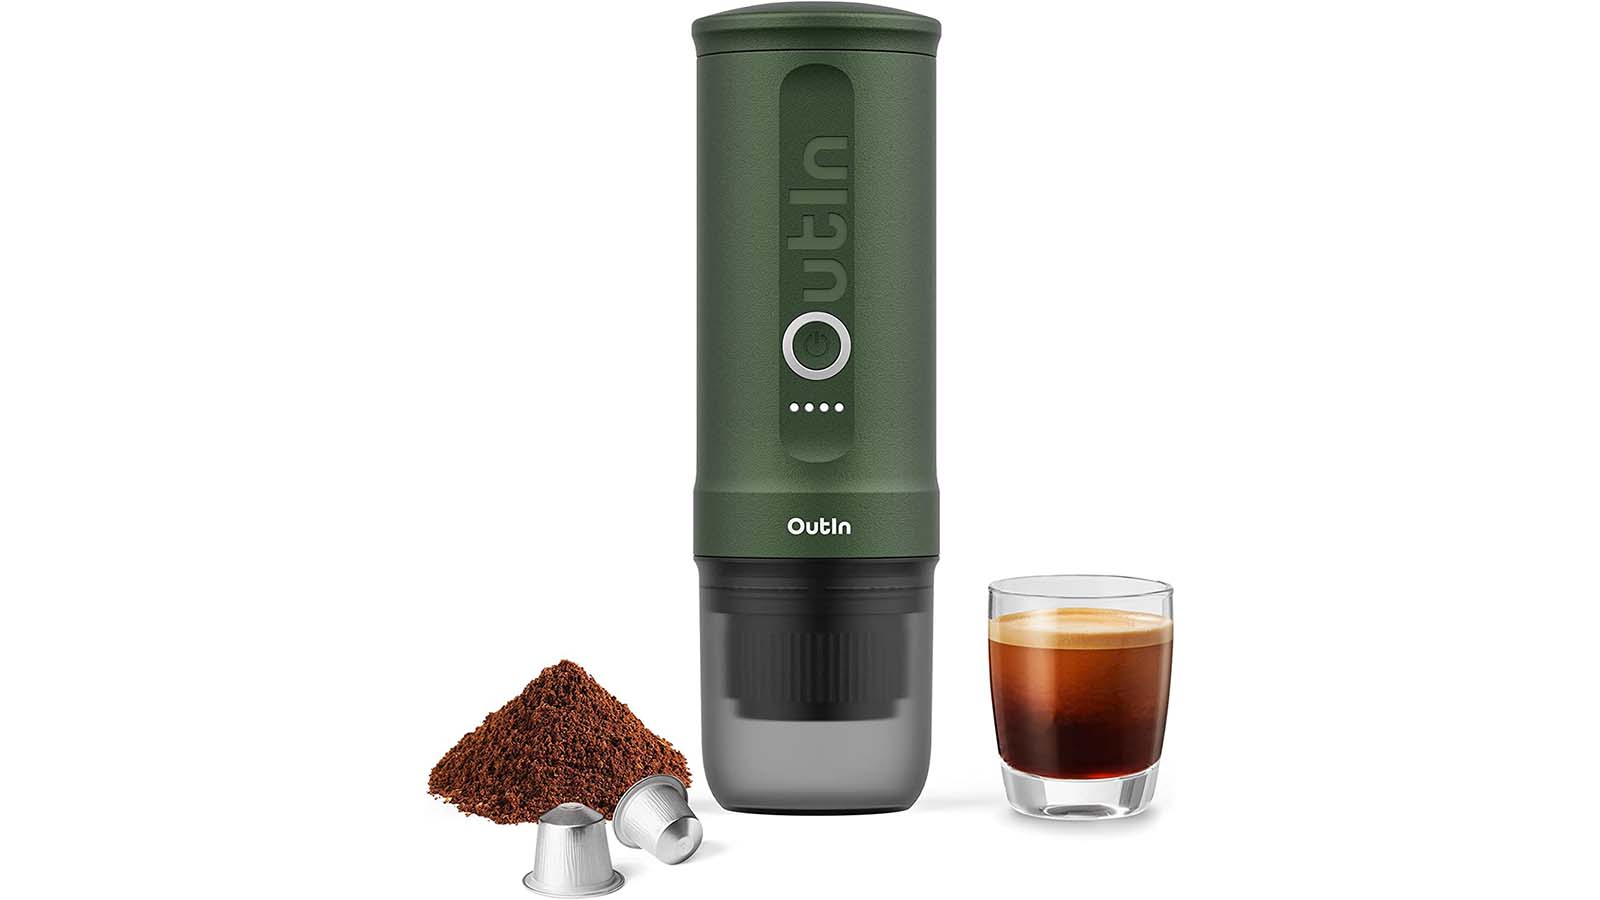 15 Best Travel Coffee Makers: The Best Ways to Make Coffee While